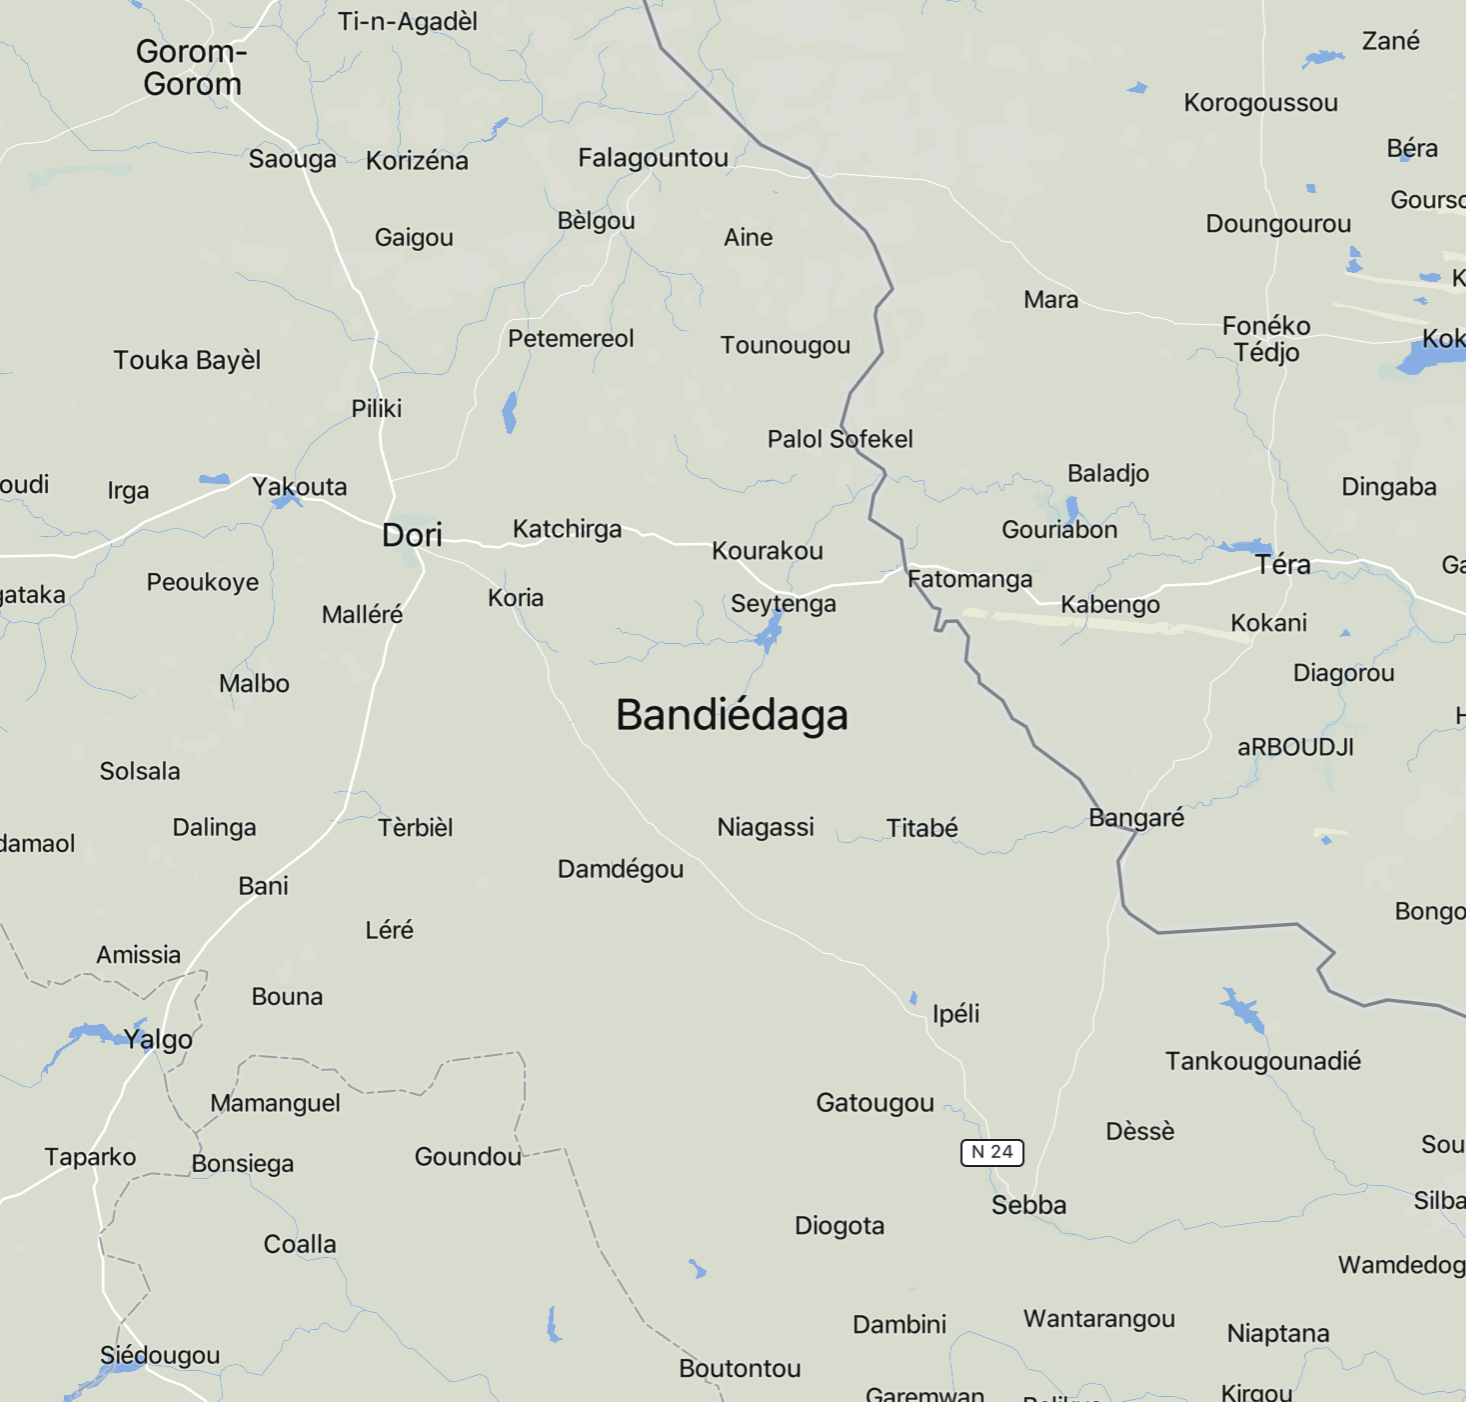 TRAC Incident Report: Suspected Islamic State Greater Sahara (ISGS) Militants Led an Armed Assault on Civilians in and Around Bandiédaga, Séno Province, Burkina Faso - 17 October 2023